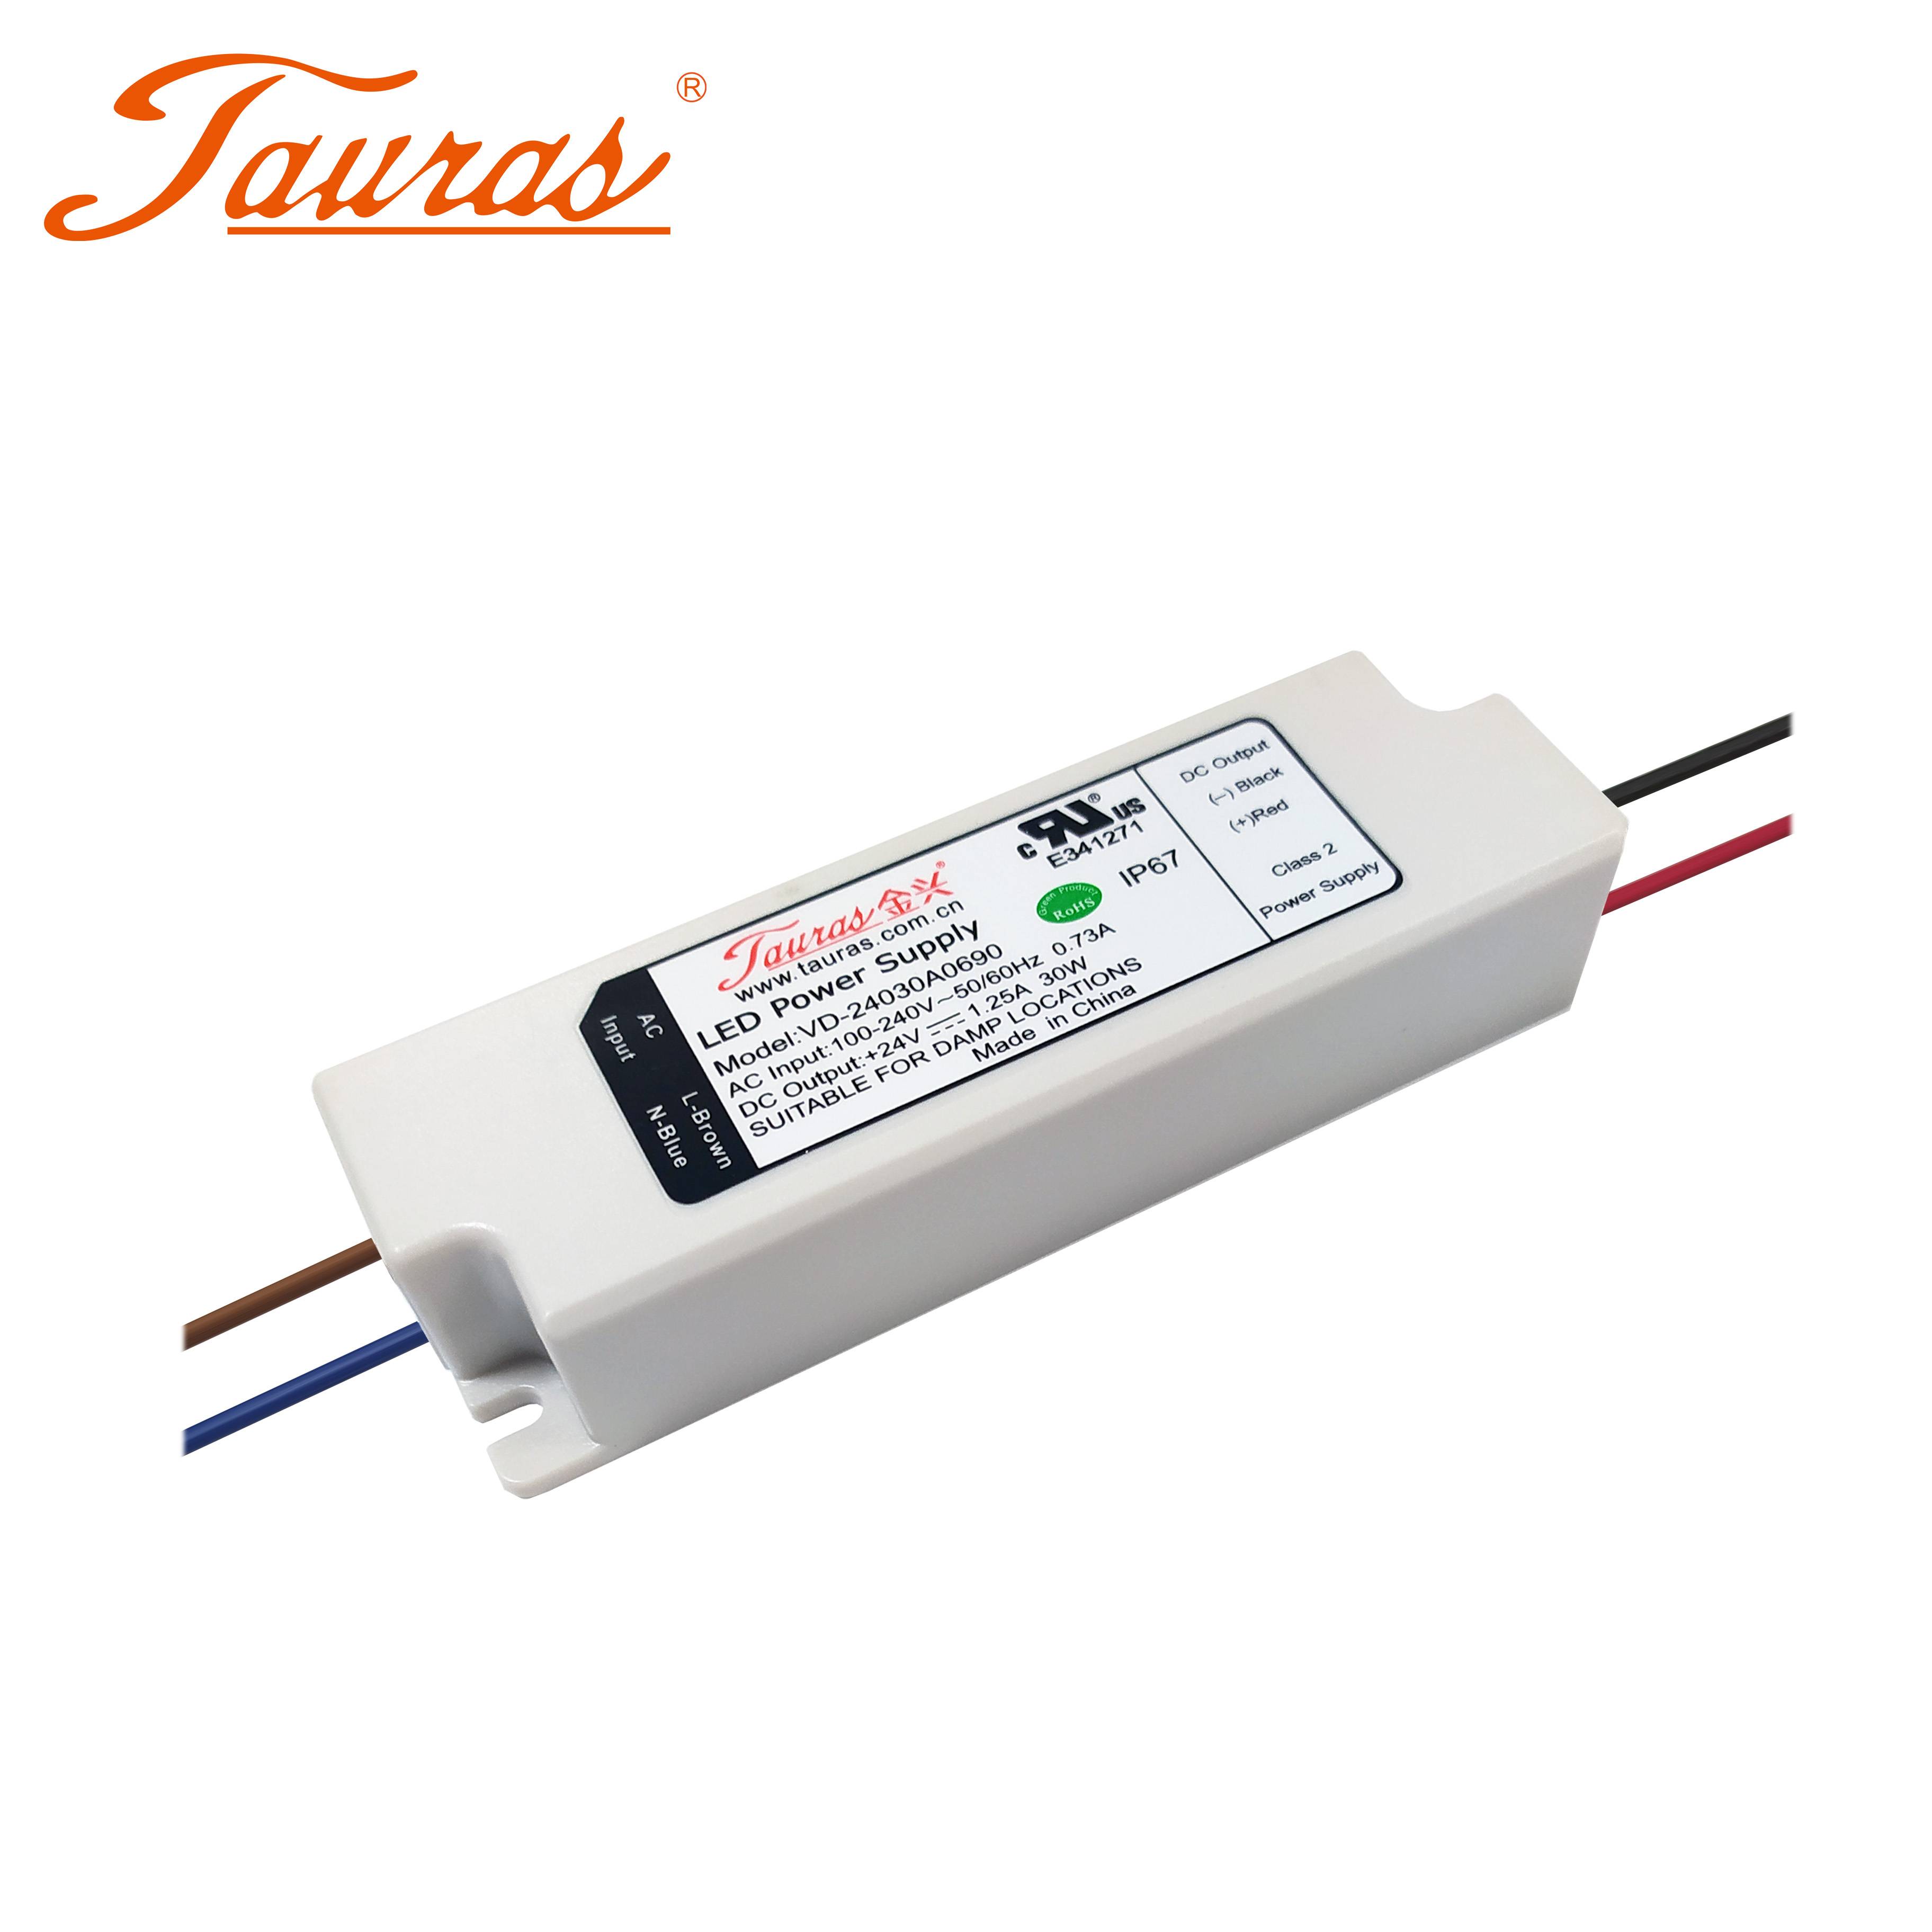 Lowest Price for Constant Voltage Led Power Supply - 12v 24v 2.5a 30w constant voltage ip67 ac to dc led driver – Tauras